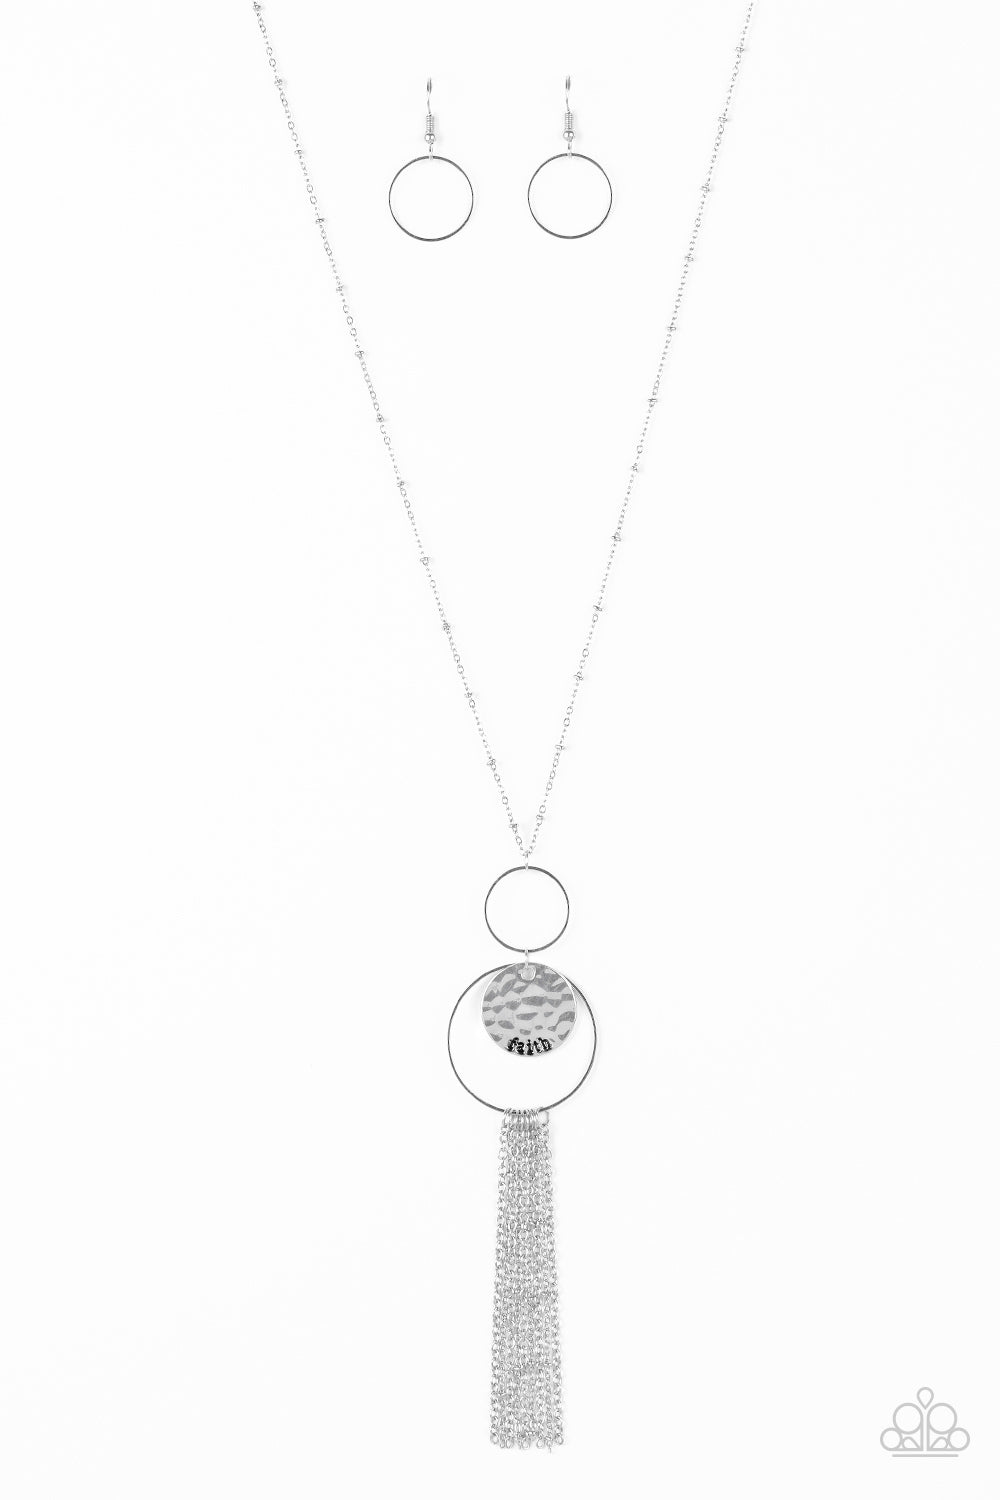 Faith Makes All Things Possible - Silver Paparazzi Necklace